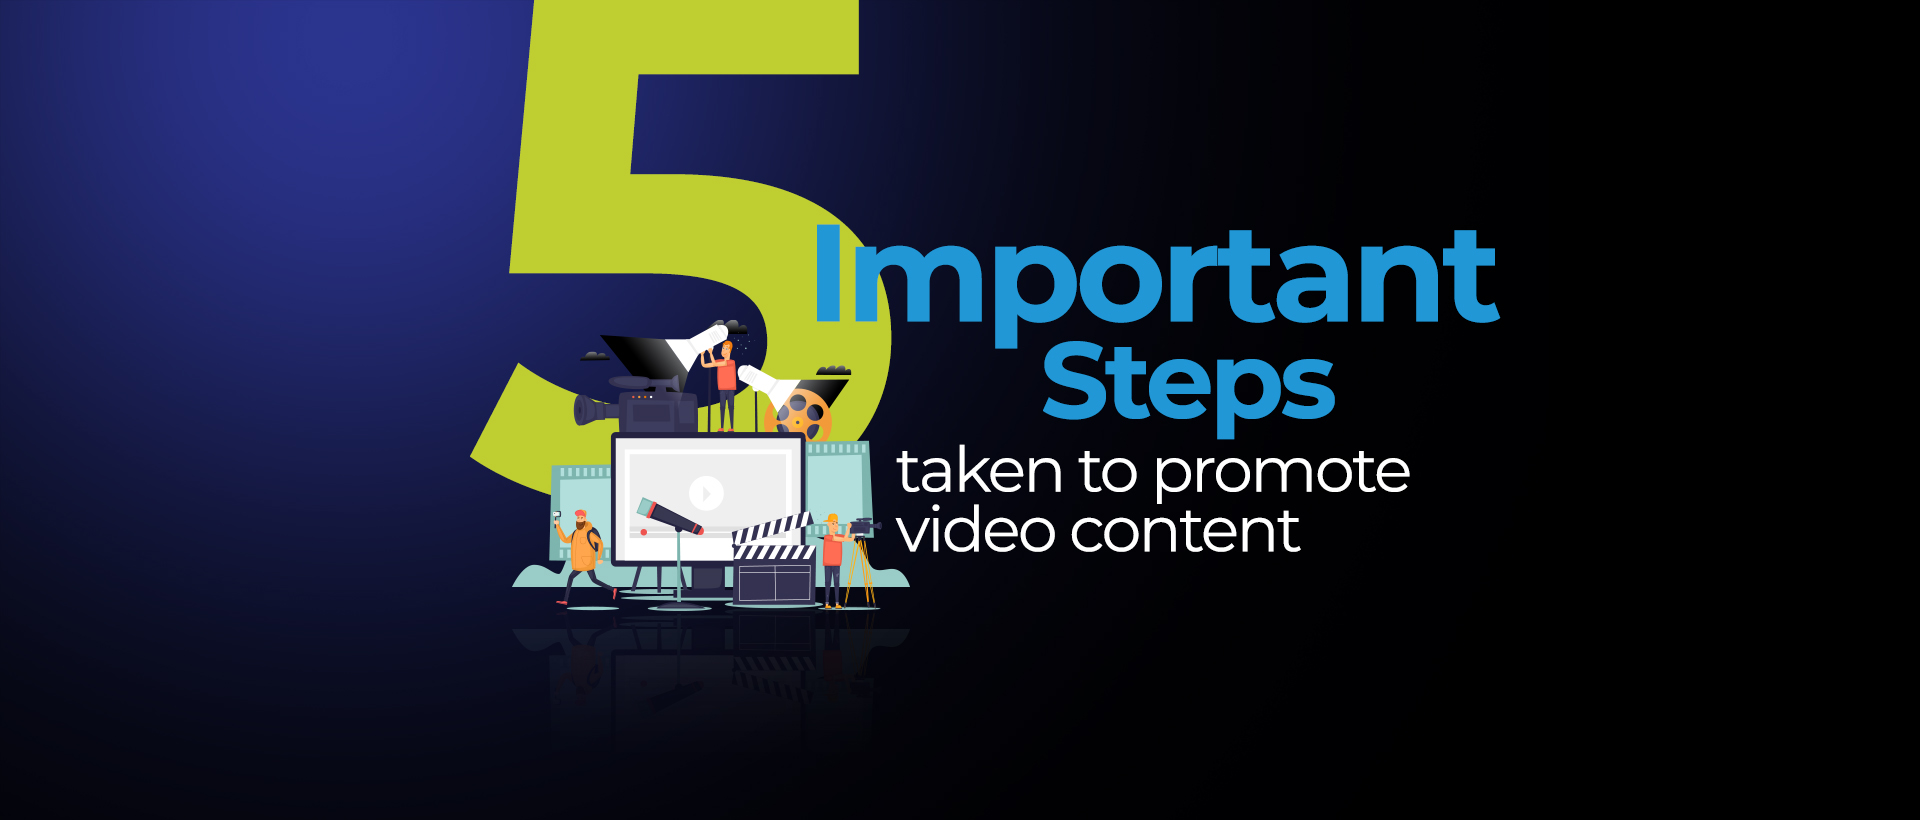 5 Important Steps taken to promote video content